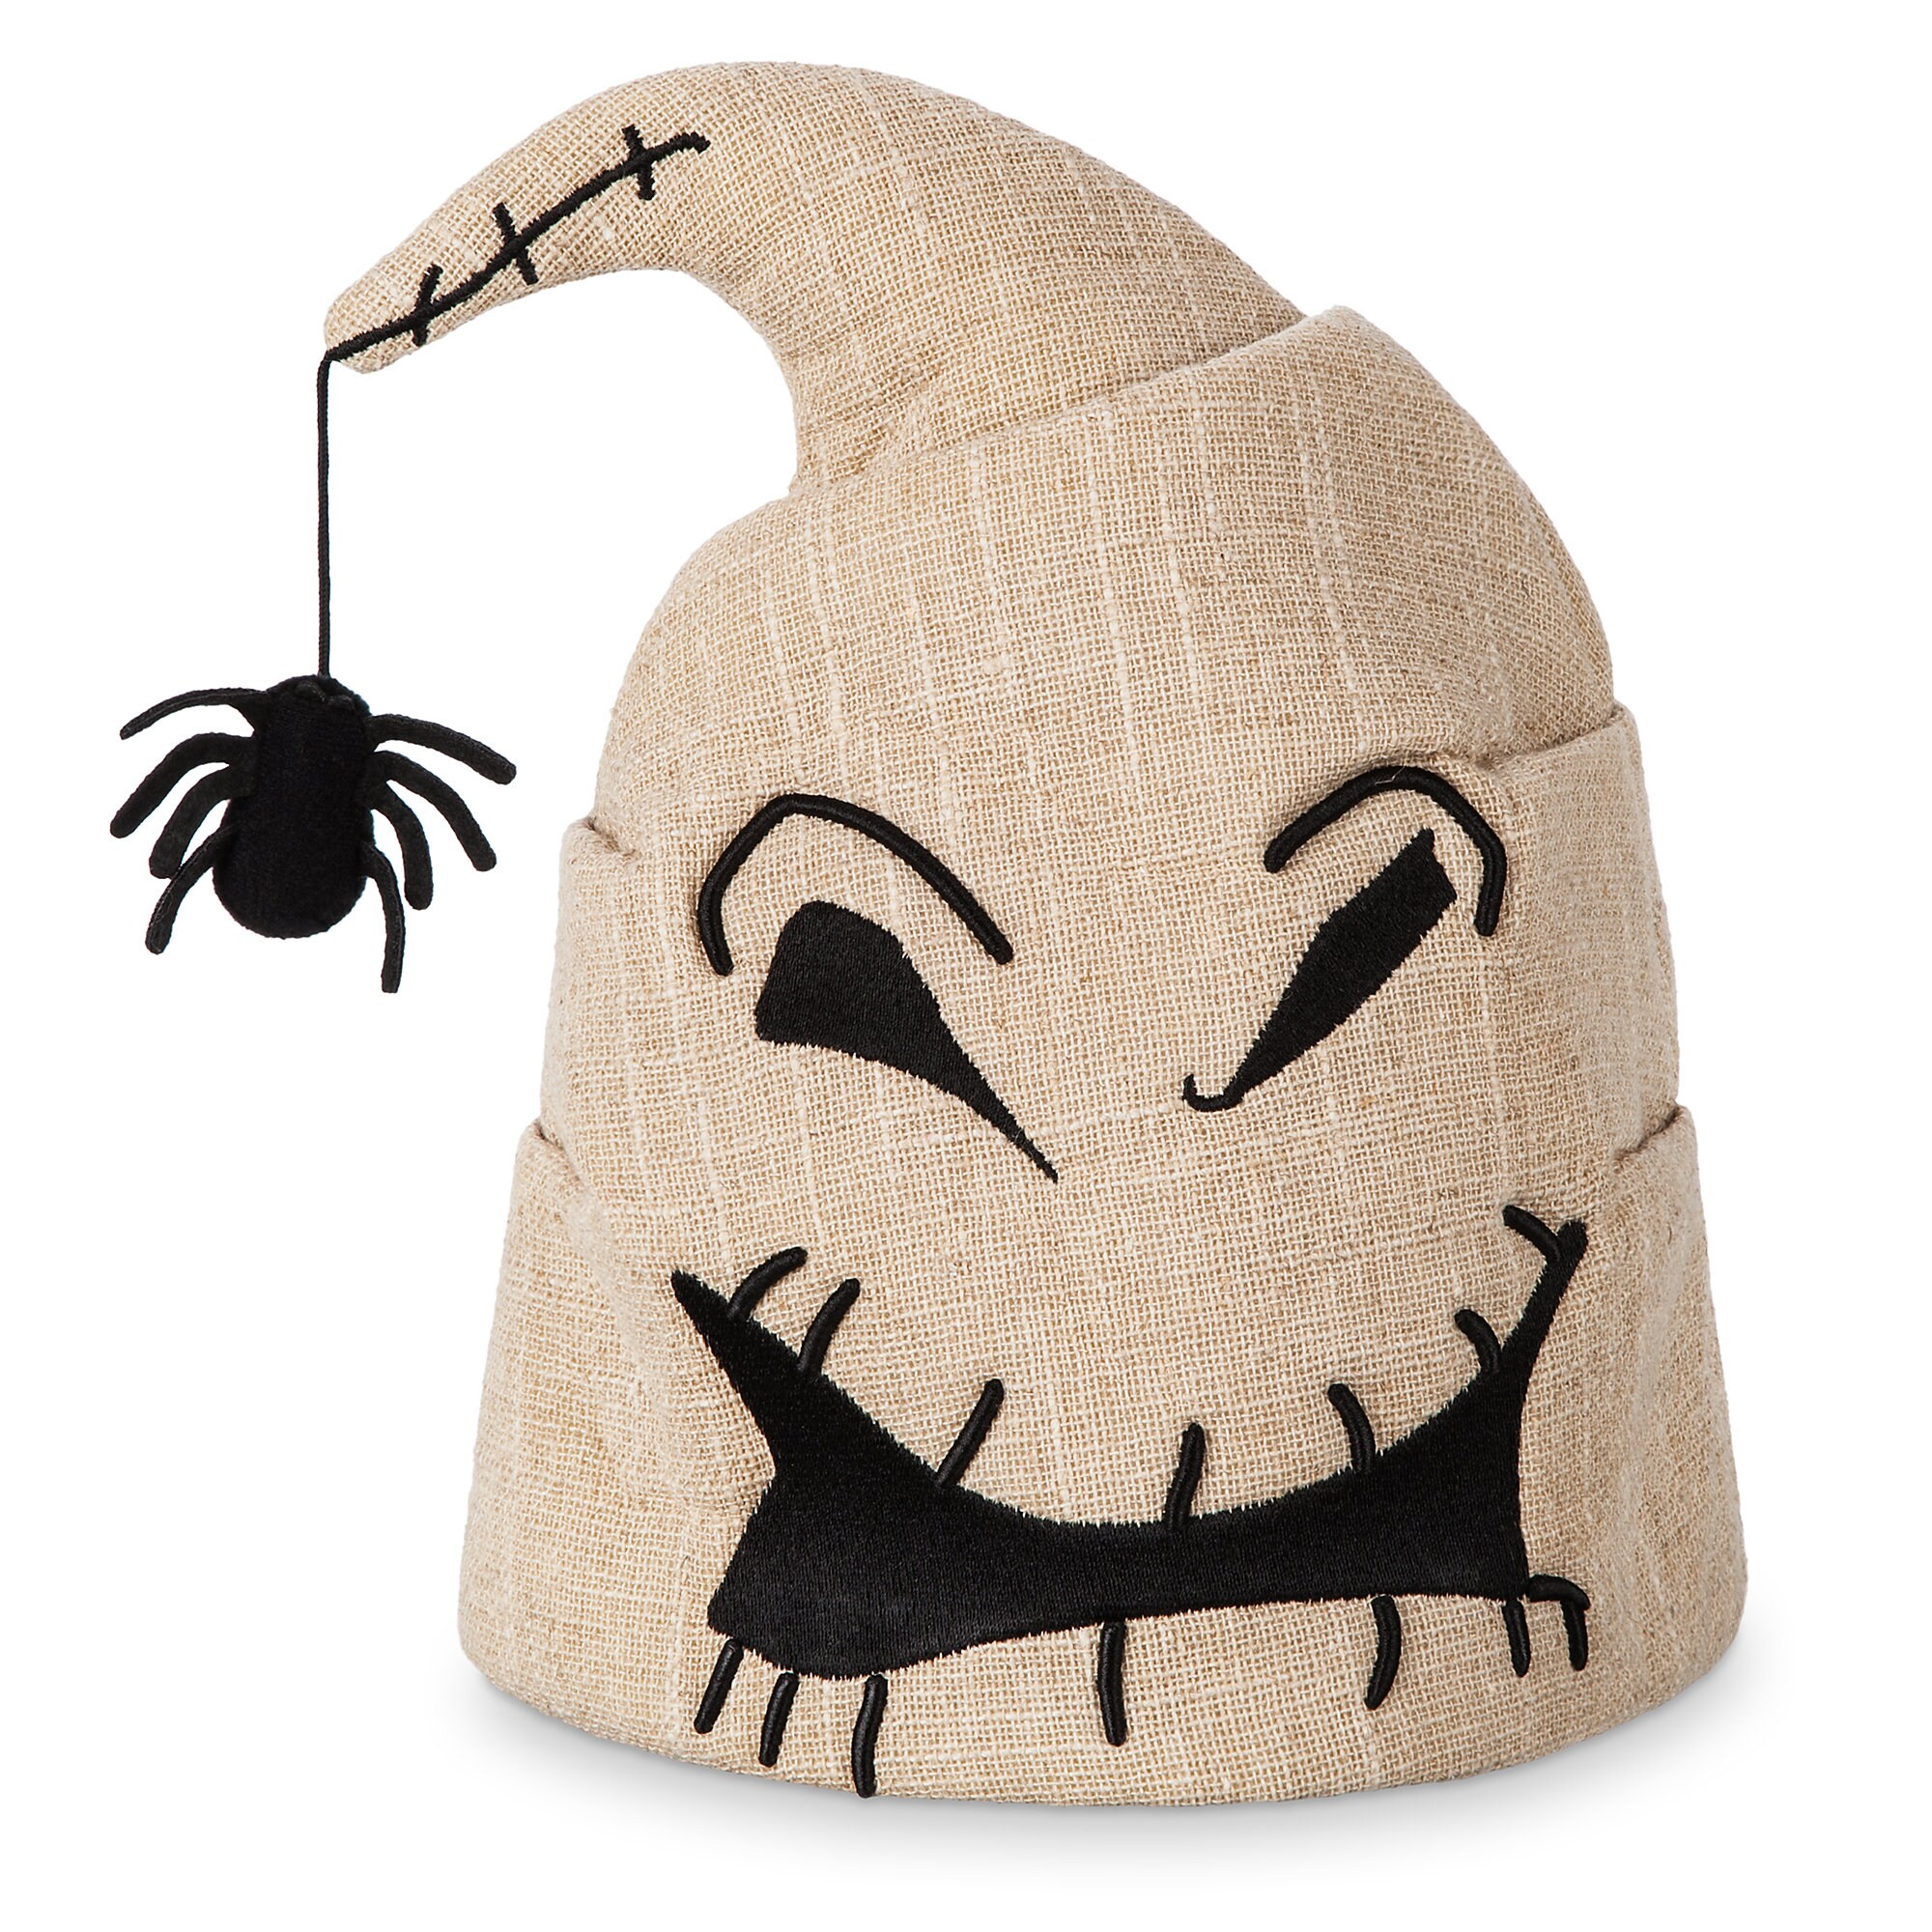 Oogie Boogie Hat for Adults - The Nightmare Before Christmas